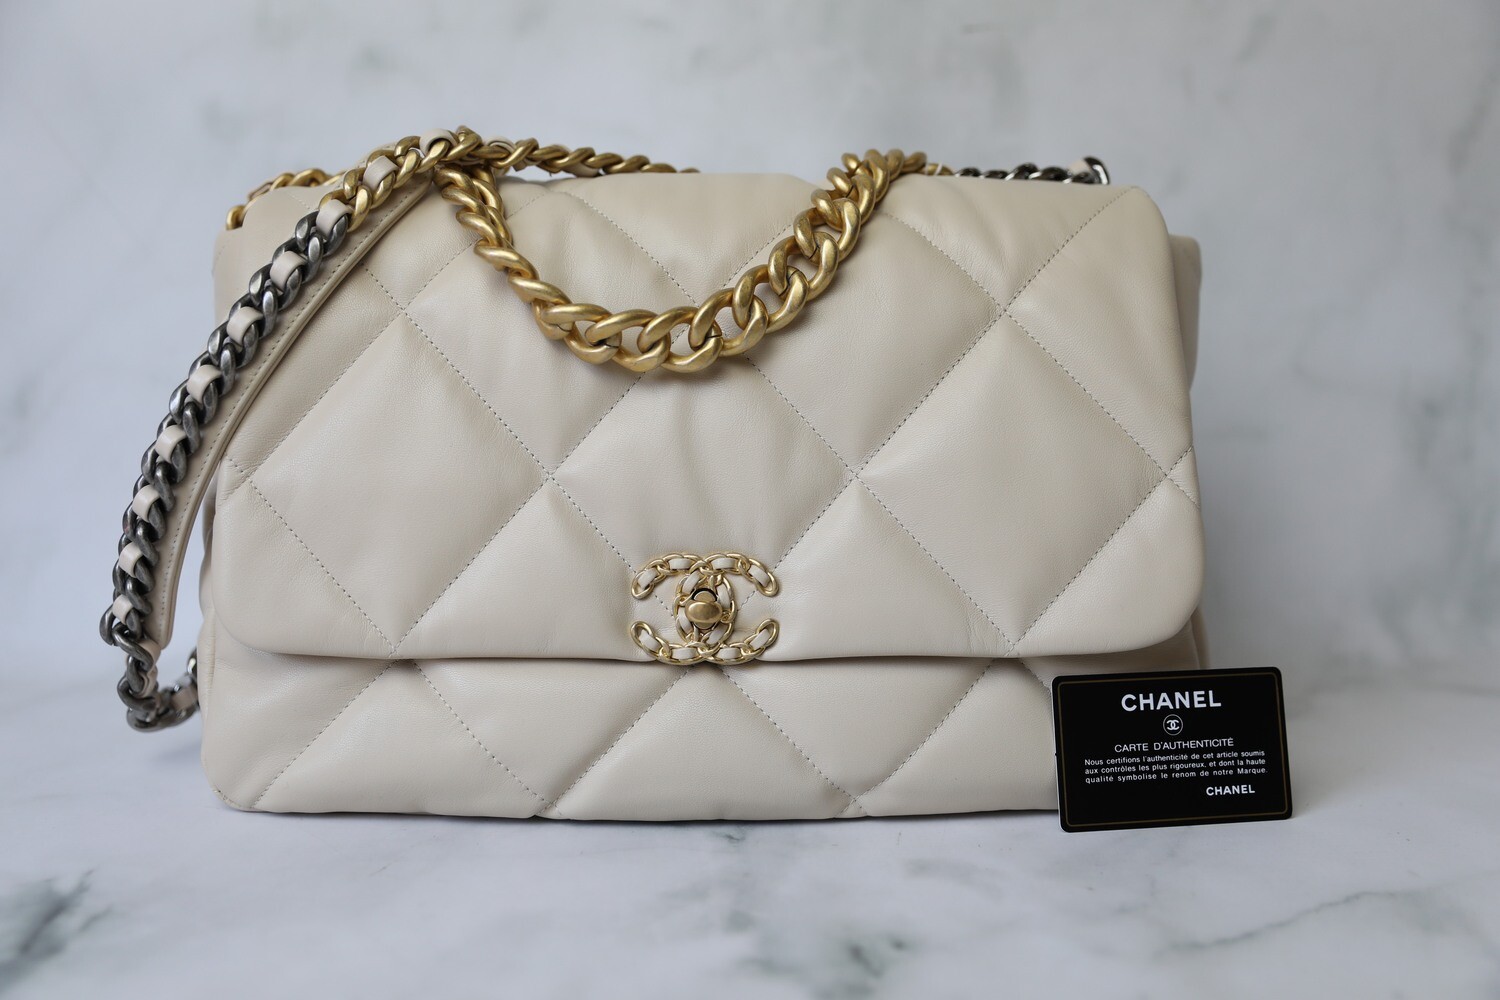 Get your hands on the stunning Chanel Beige 19 Bag with Mixed